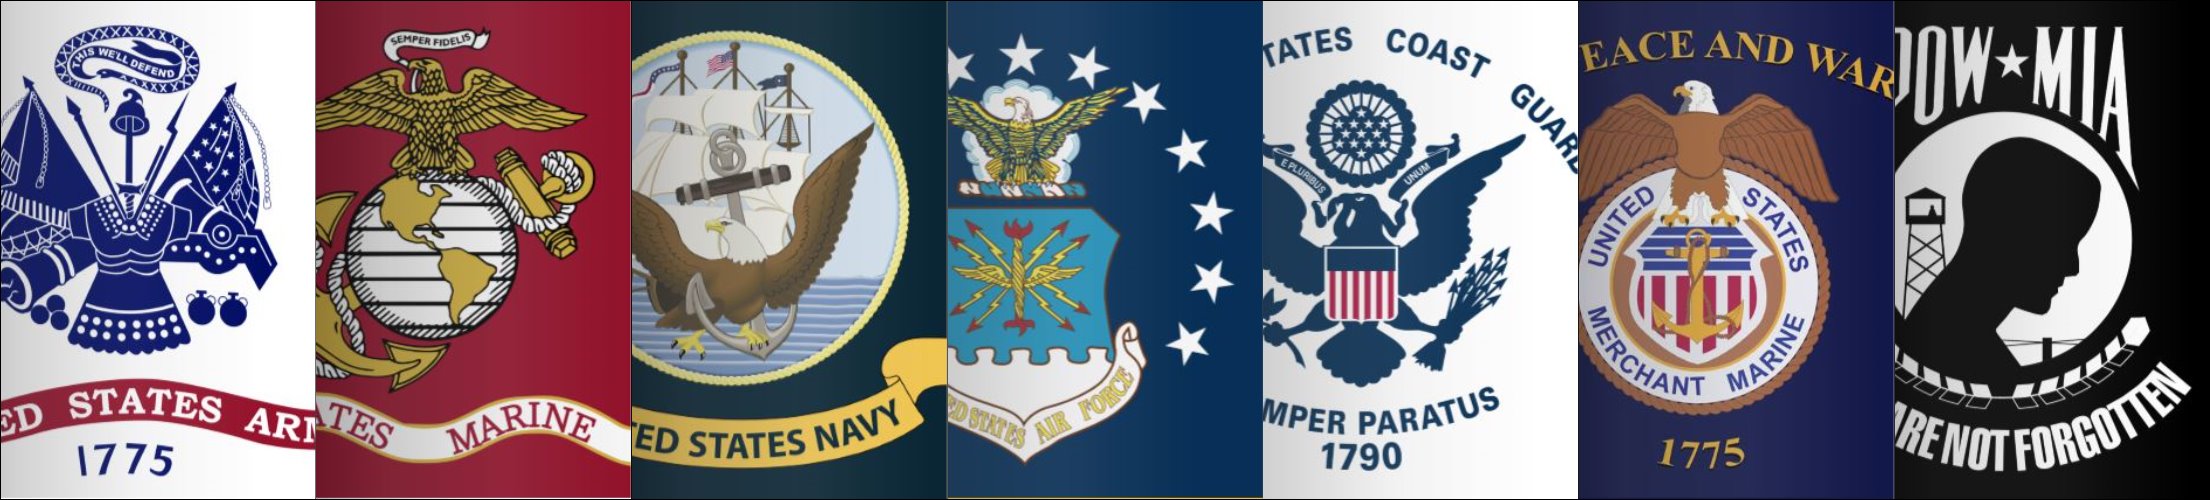 Military Flags Collage - from left to right Army, Marine Corps, Navy, Air Force, Coast Guard, Merchant Marines, POW and MIA